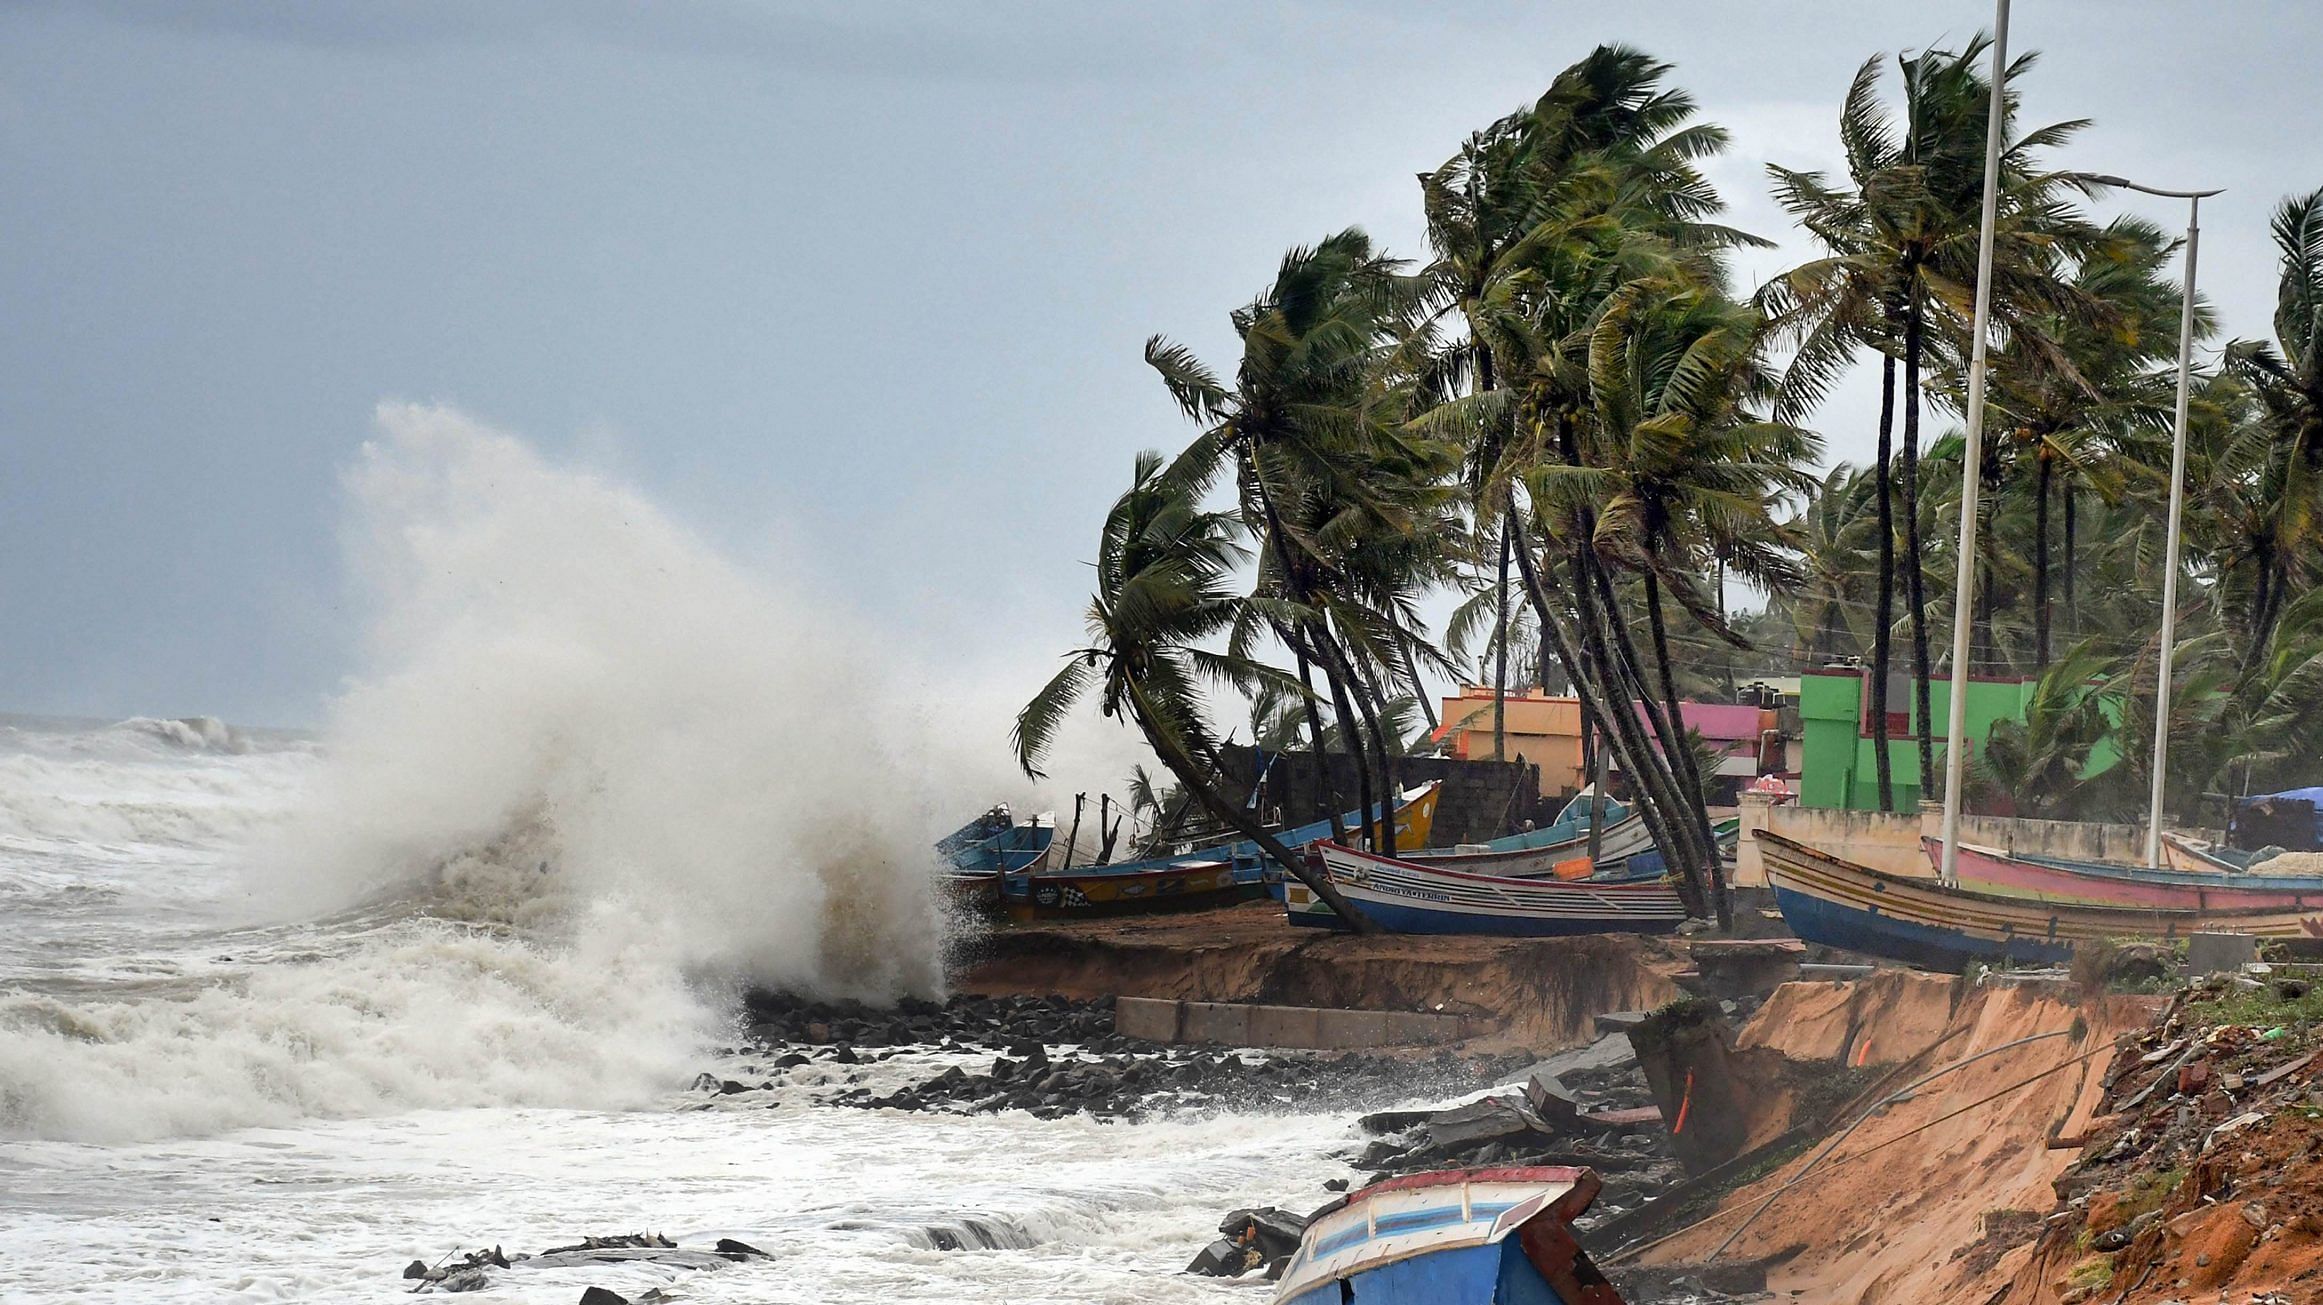 Cyclone Tauktae intensifies into 'extremely severe cyclonic storm', warns IMD